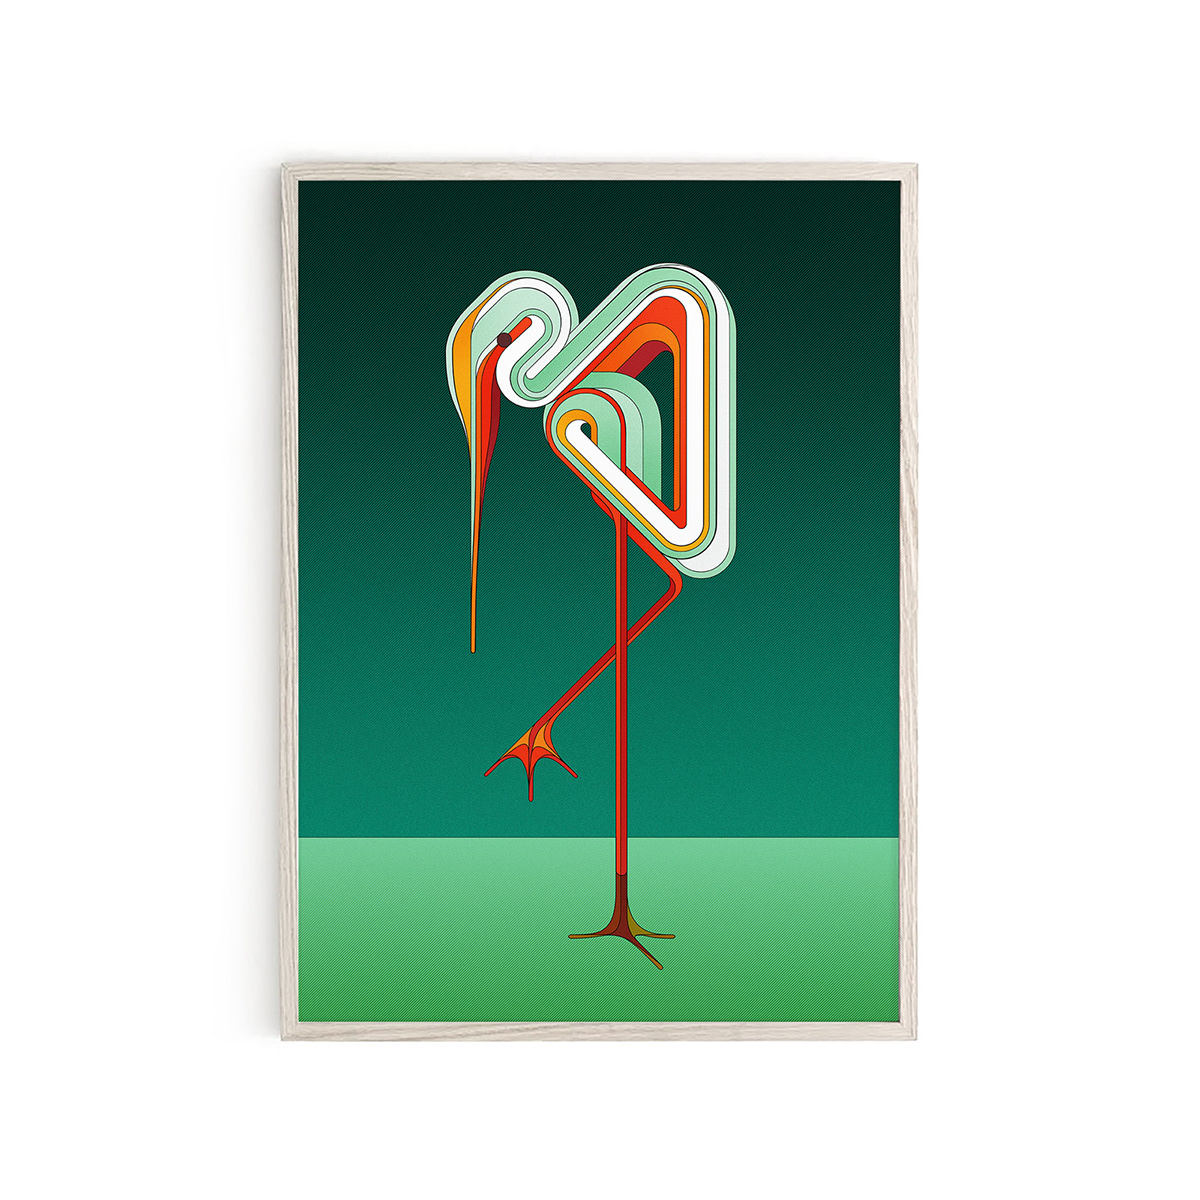 a3 giclee print of a geometric illustration of a stork by Made Up Studio / Charles Williams